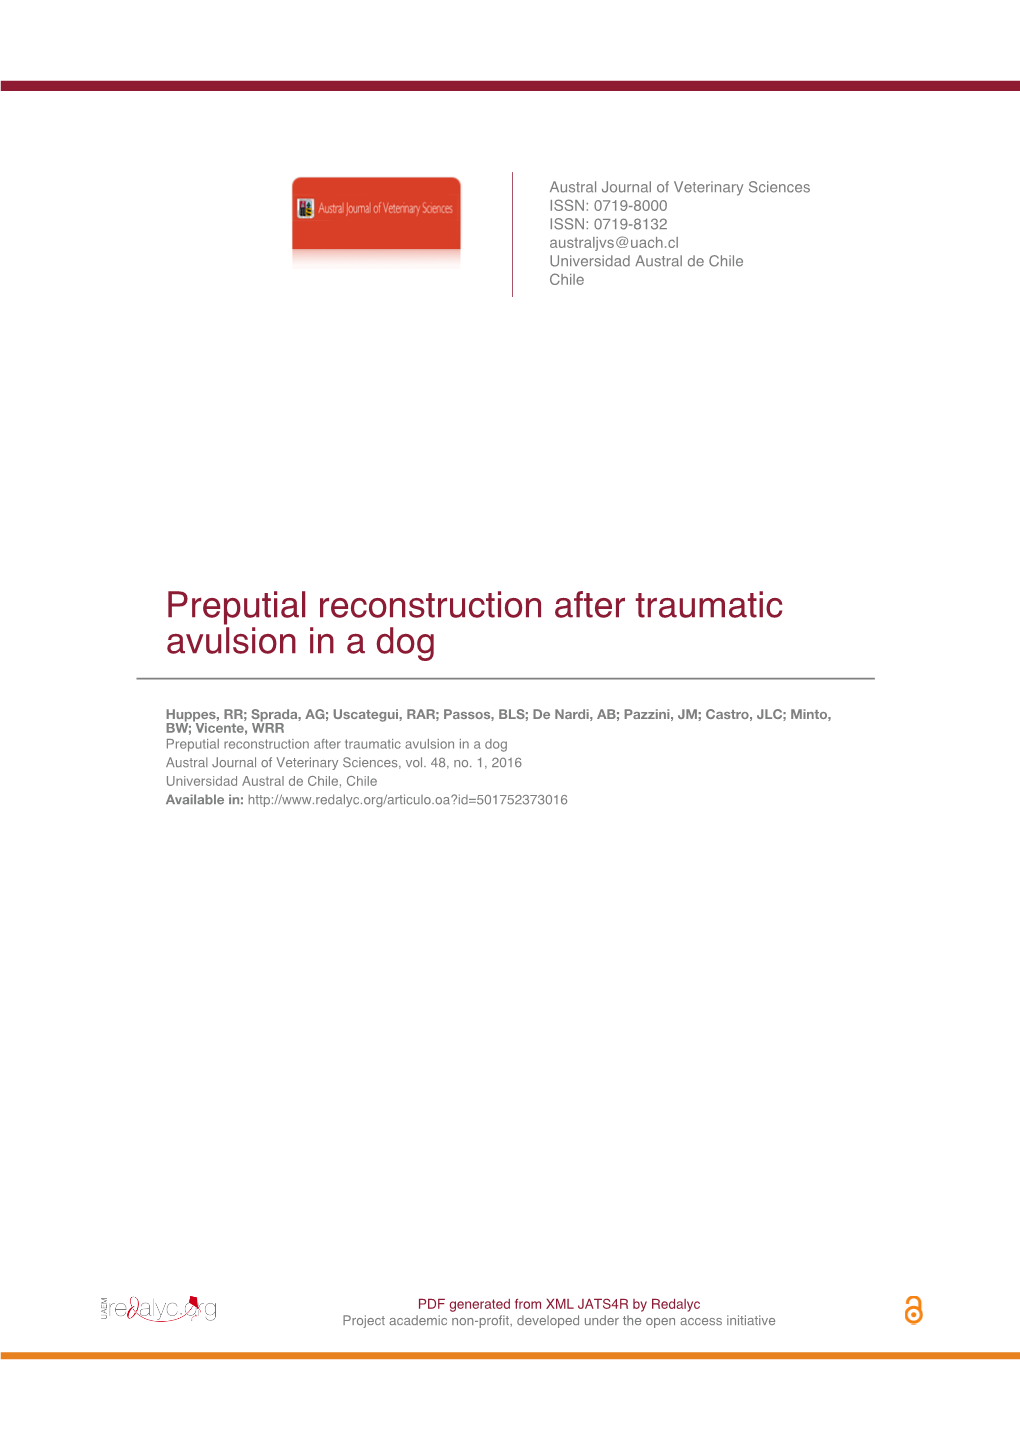 Preputial Reconstruction After Traumatic Avulsion in a Dog